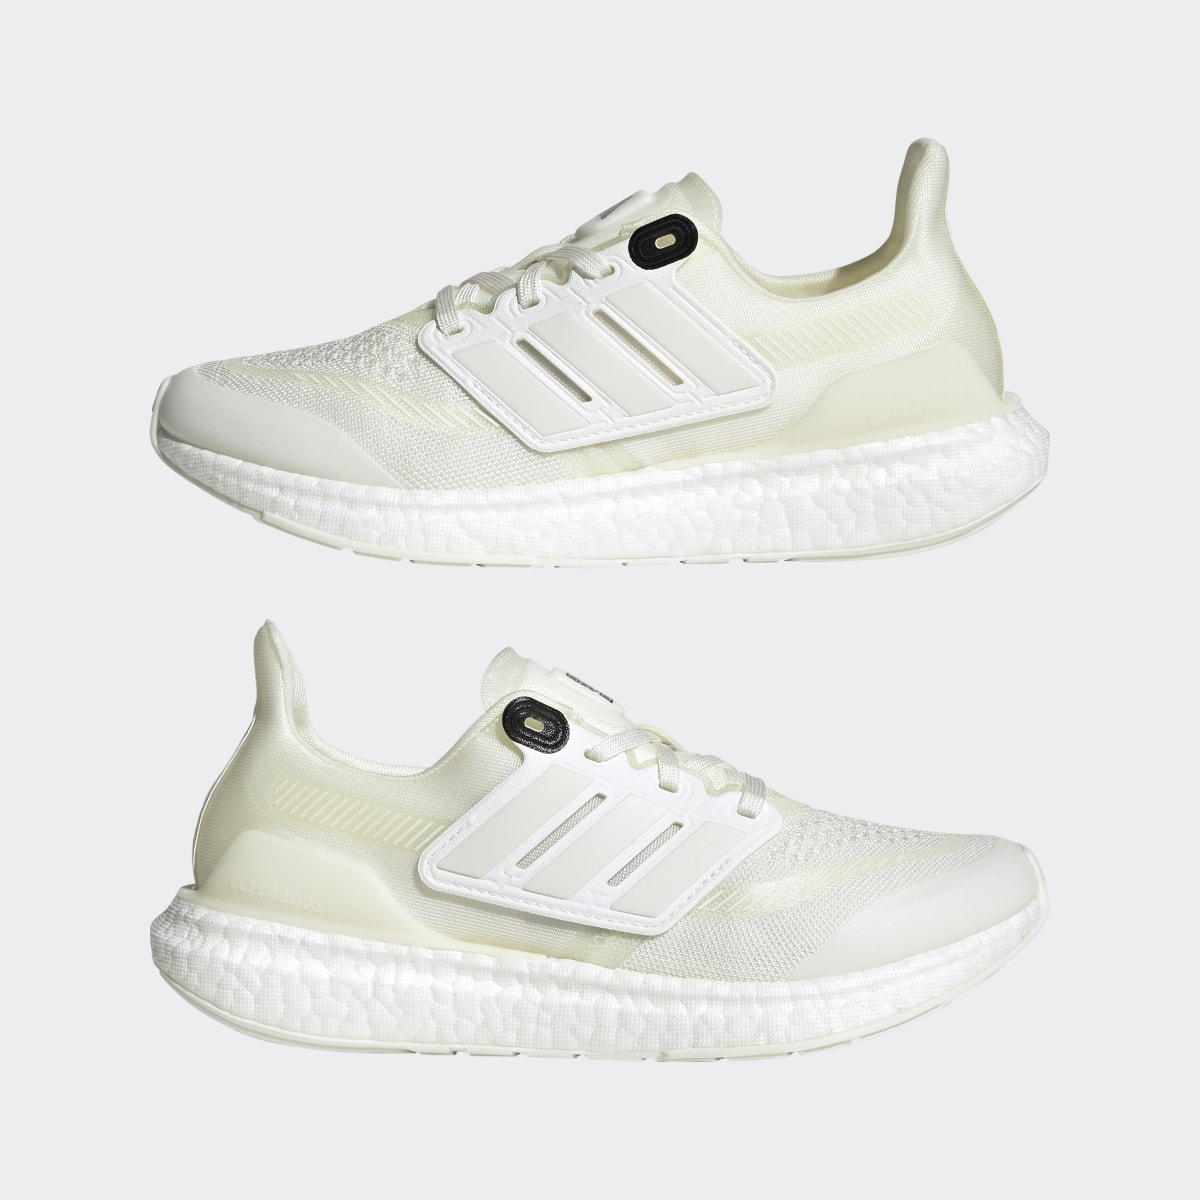 Adidas Zapatilla Ultraboost Made to Be Remade 2.0. 11